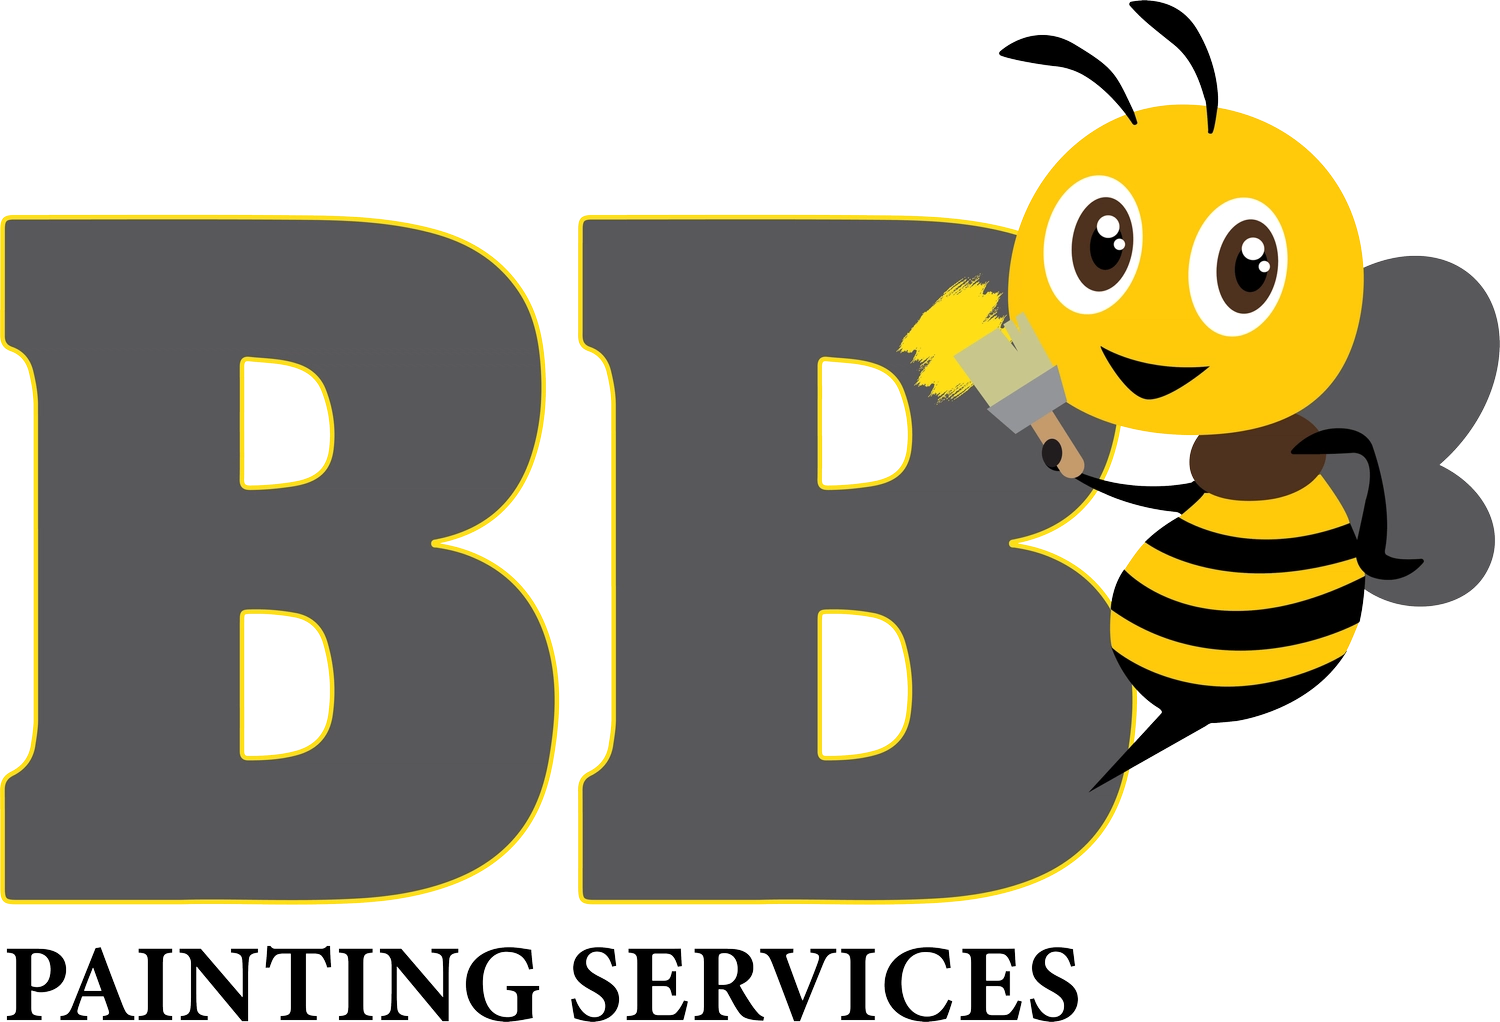 BB Painting services Logo